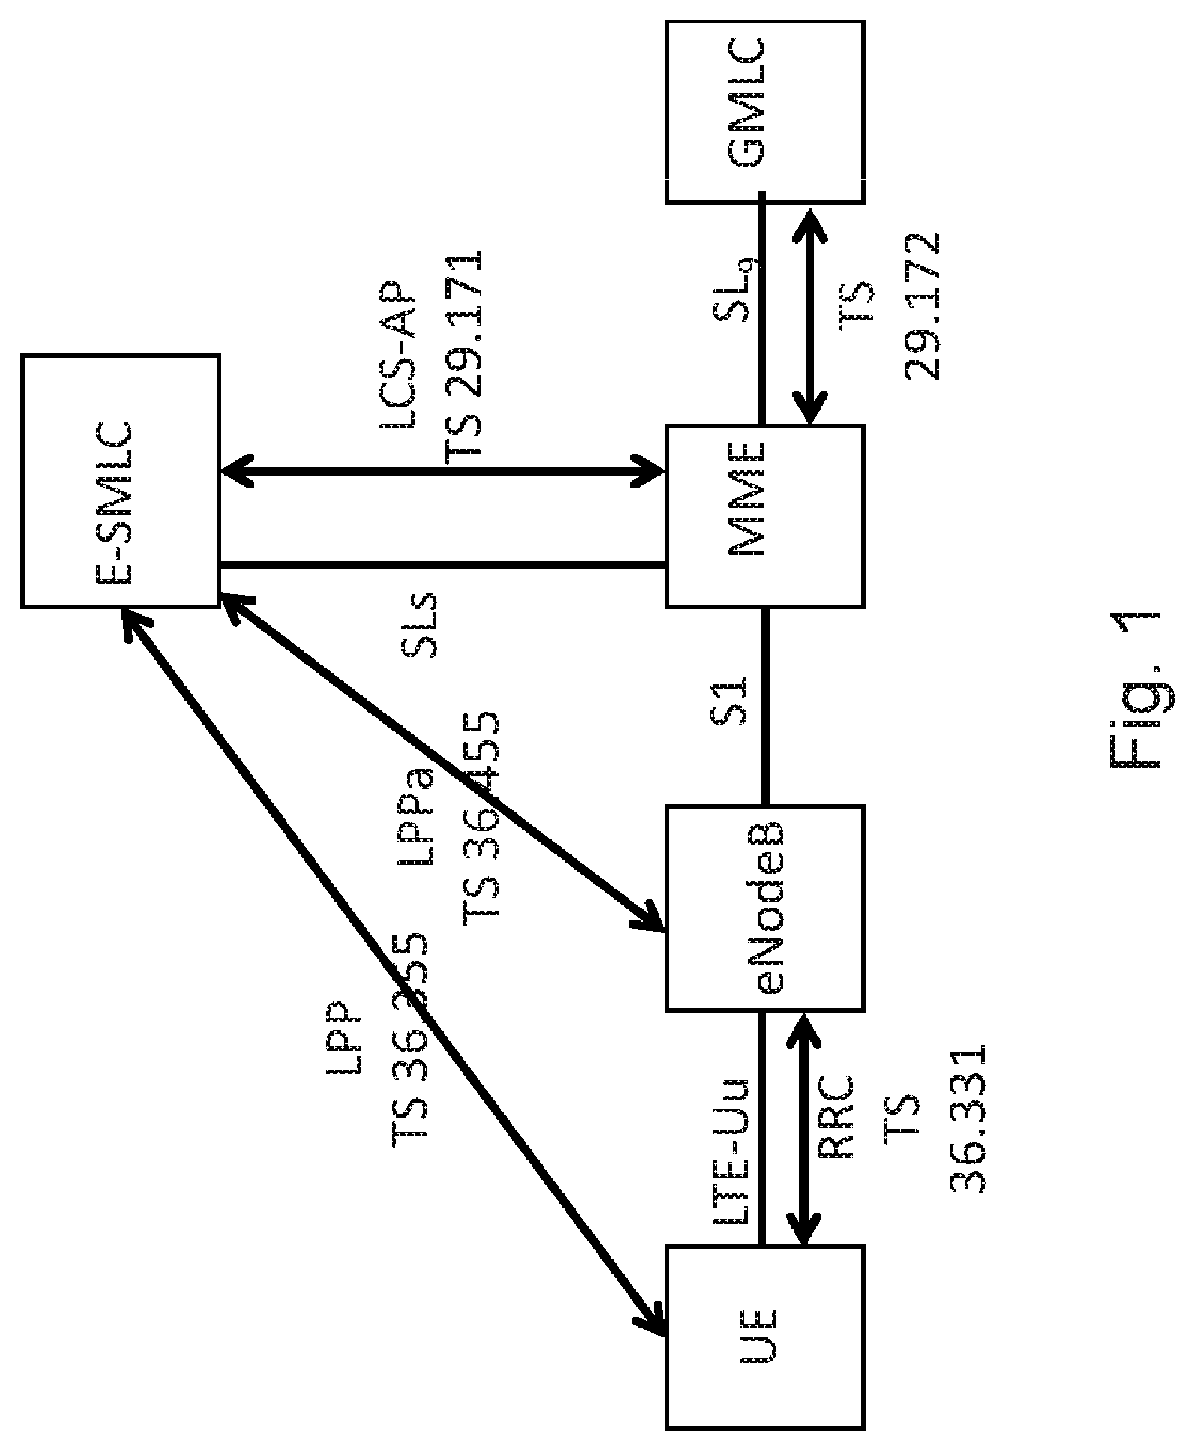 Conditional Termination of RSTD Measurements